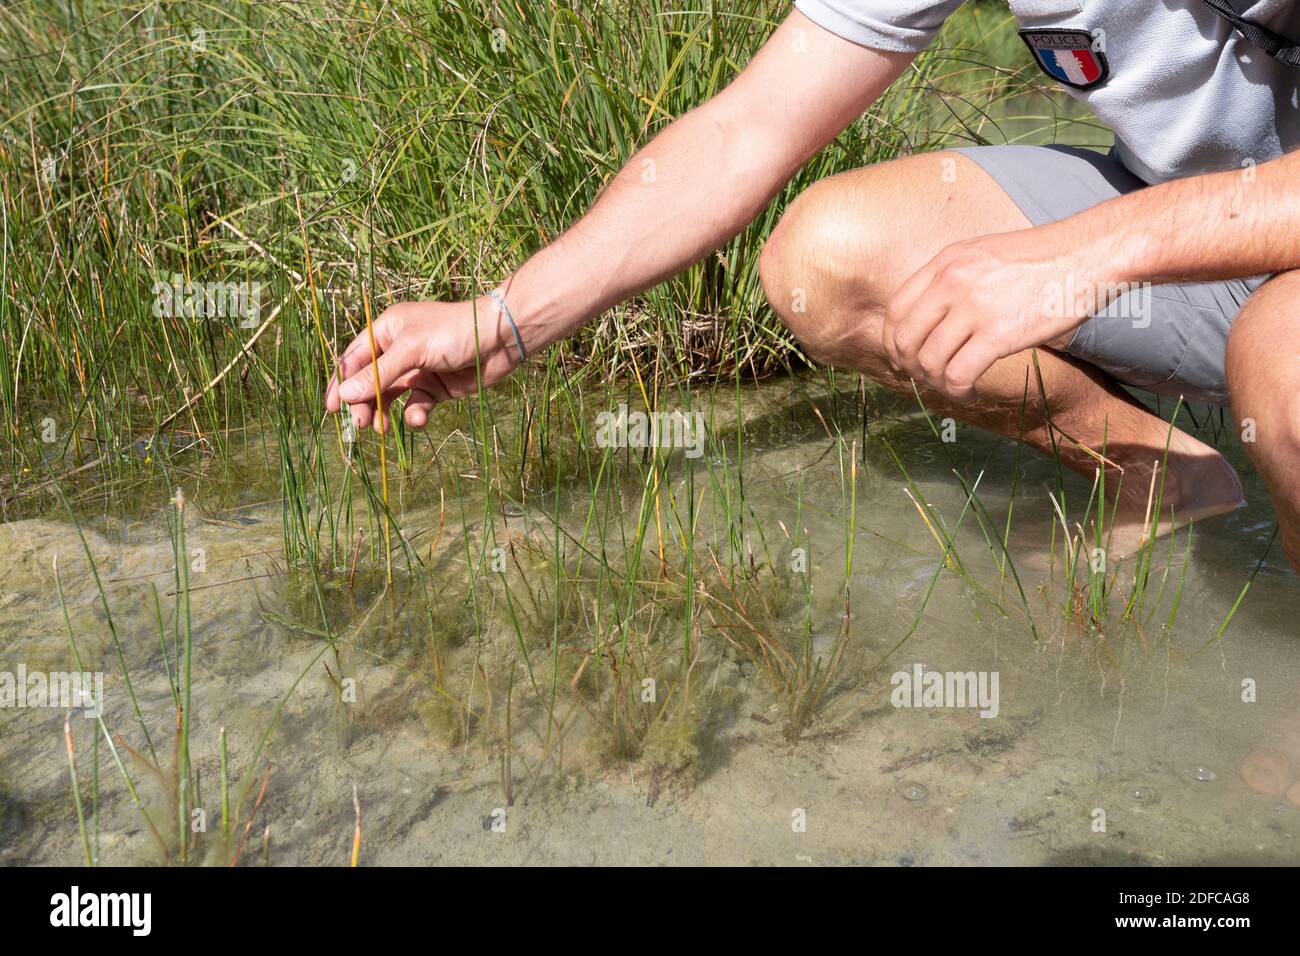 France, Savoie, Avant-Pays savoyard, the lake of Aiguebelette, the guard inspects the flora, Here the lake bulrush (Scirpus lacustris) Stock Photo